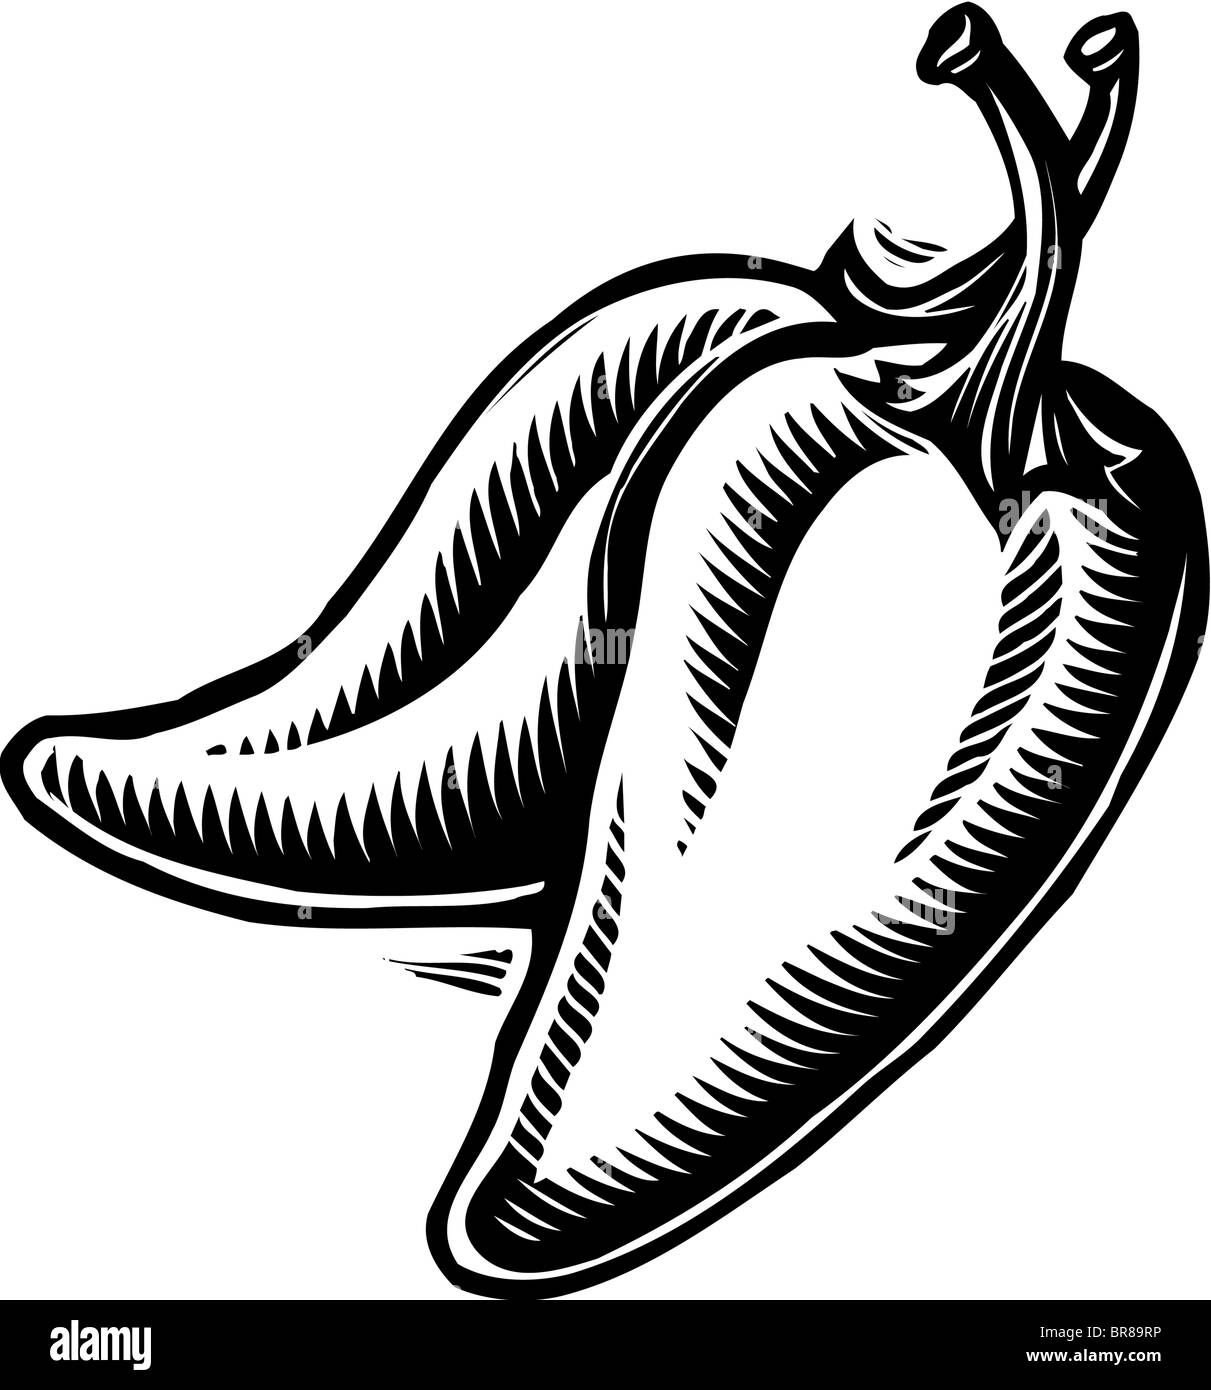 Two jalapeno peppers in black and white Stock Photo